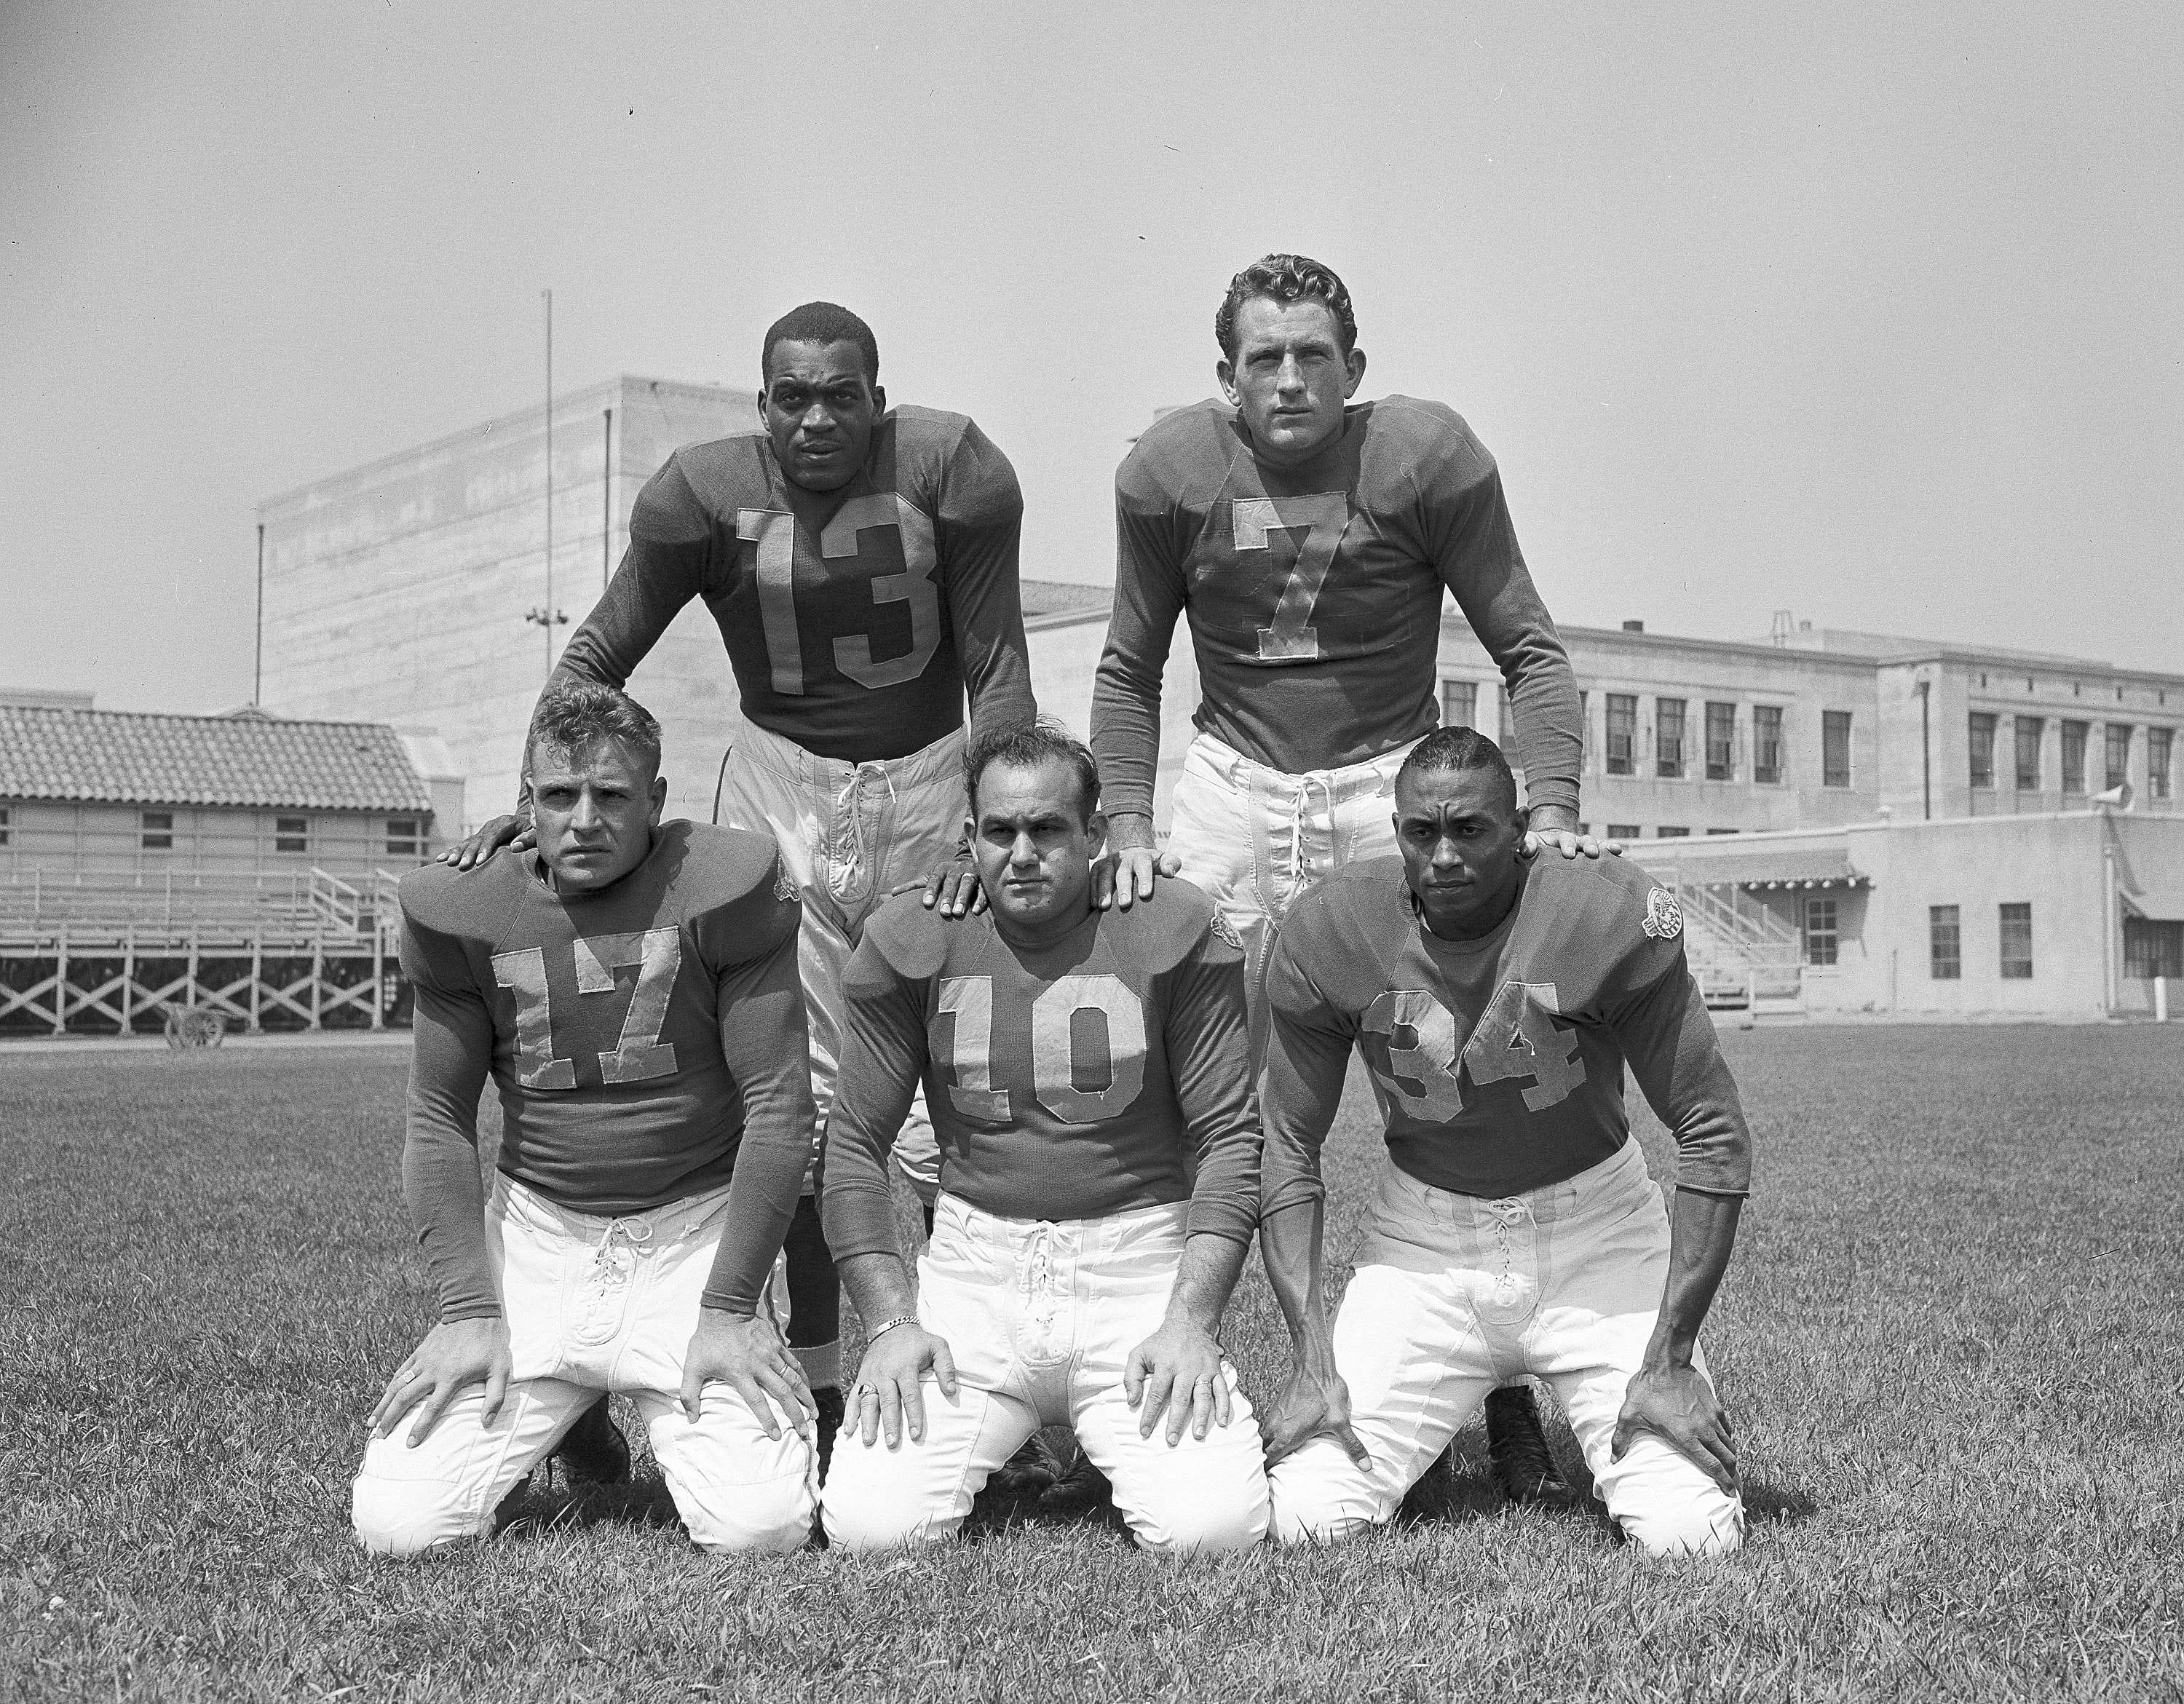 Former UCLA teammates (back row) Kenny Washington, Bob Waterfield, (bottom row) Jack Finlay, Nate de Francisco and Woody Strobe at Los Angeles Rams camp in Compton in 1946.